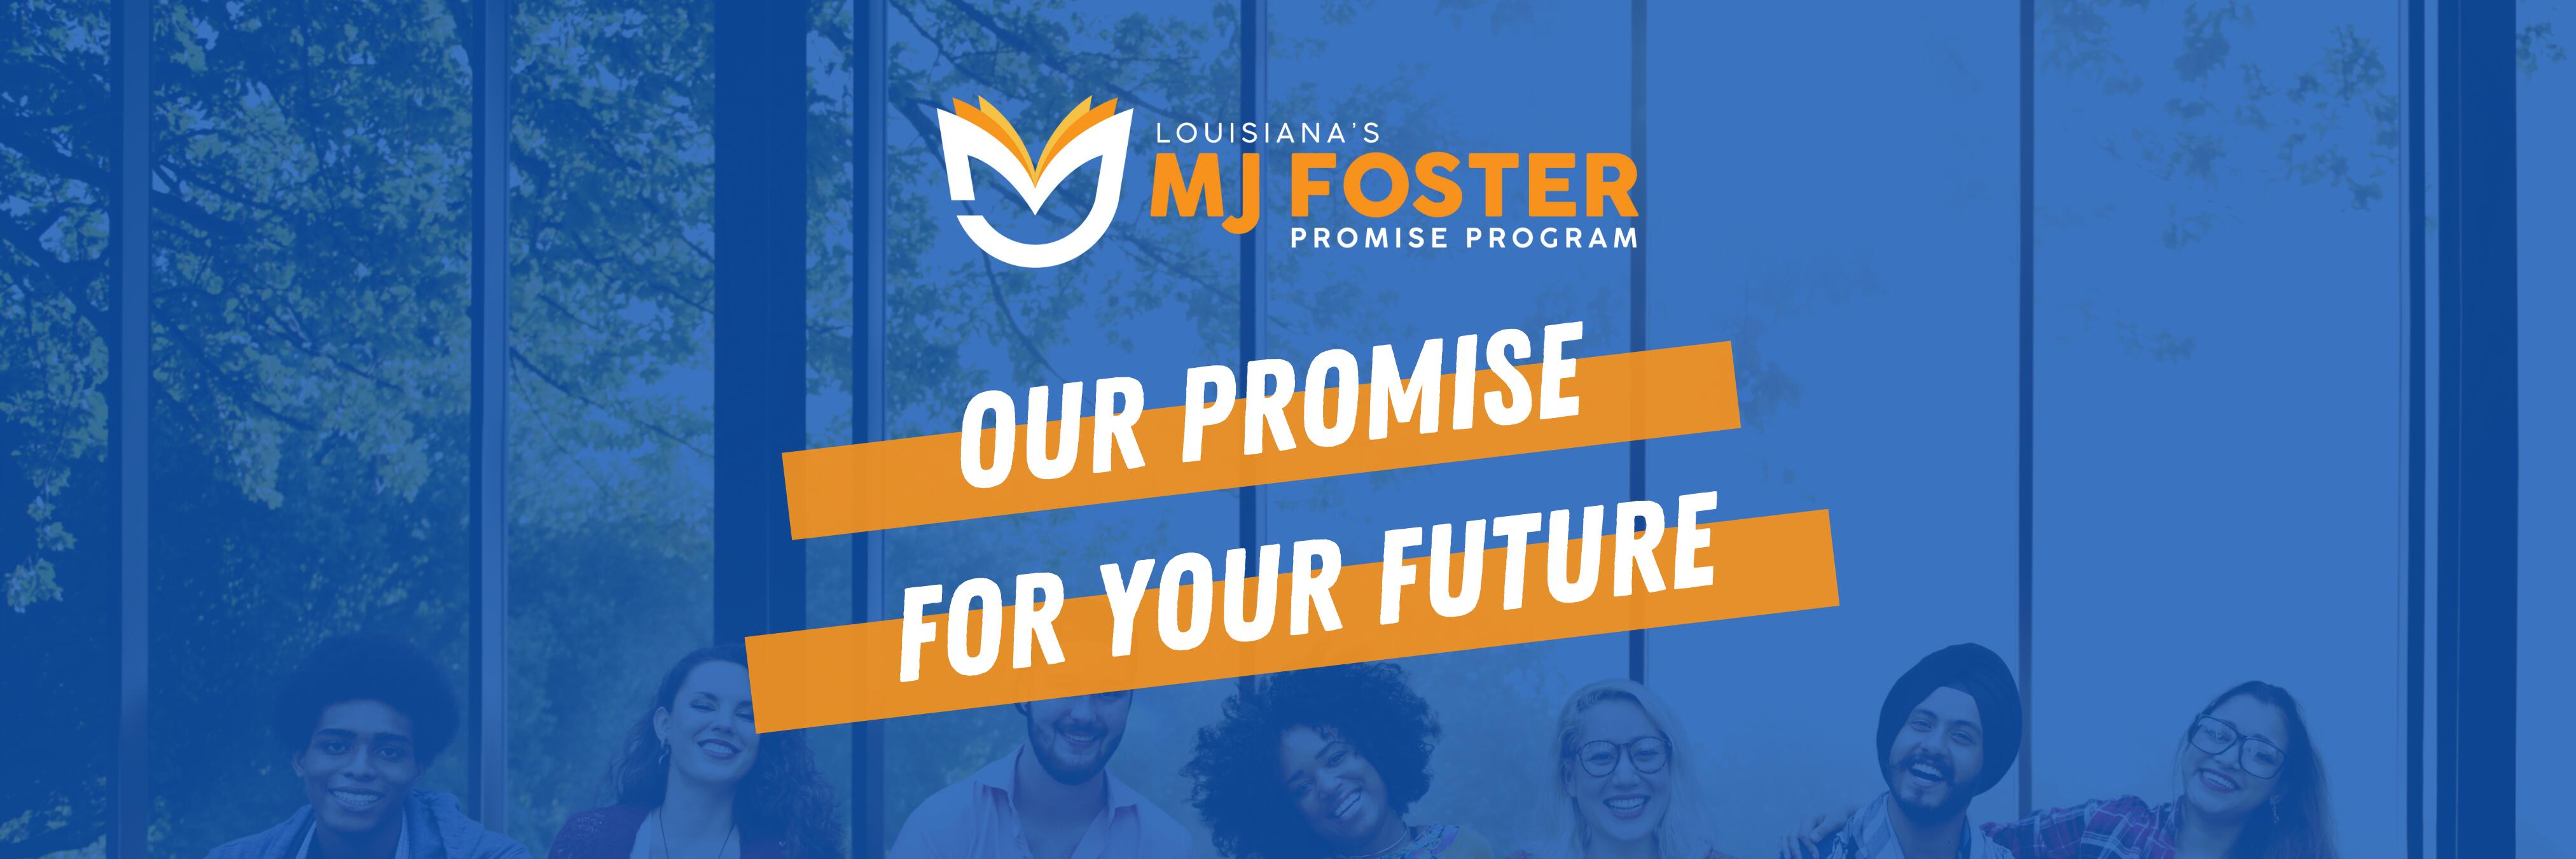 MJ Foster Promise Program Our Promise for Your Future